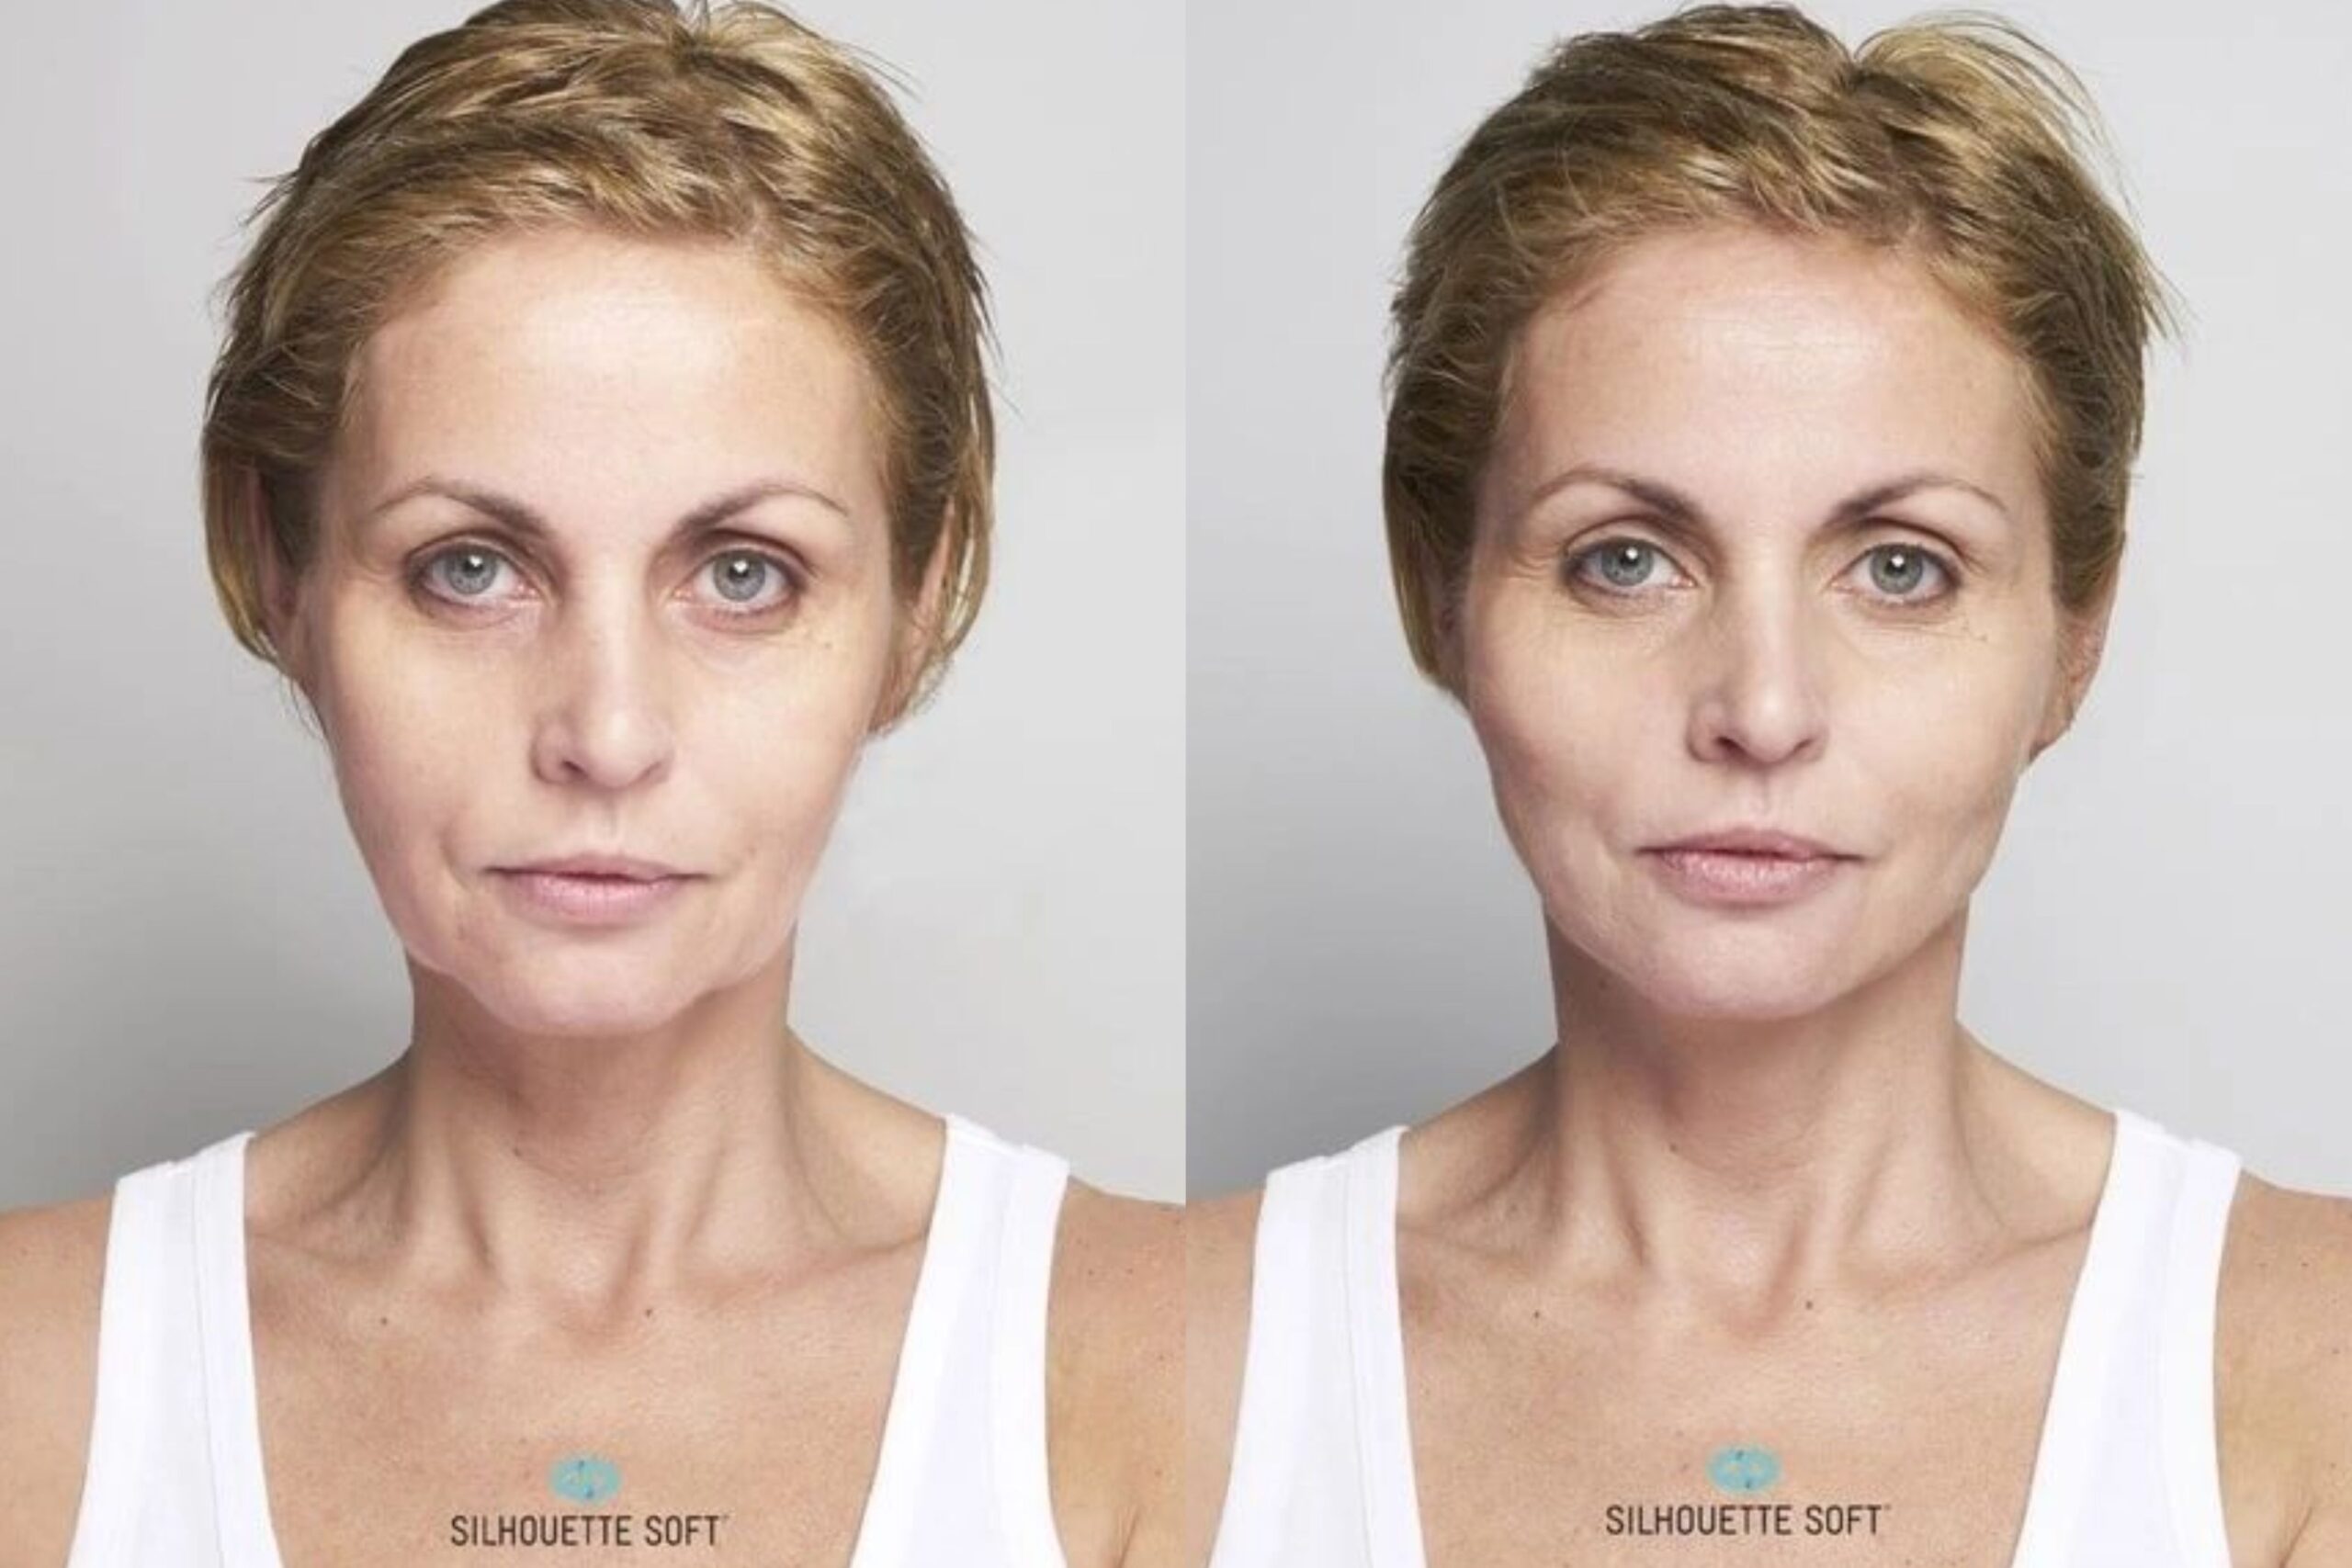 Silhouette Soft thread lifts results, before and after image